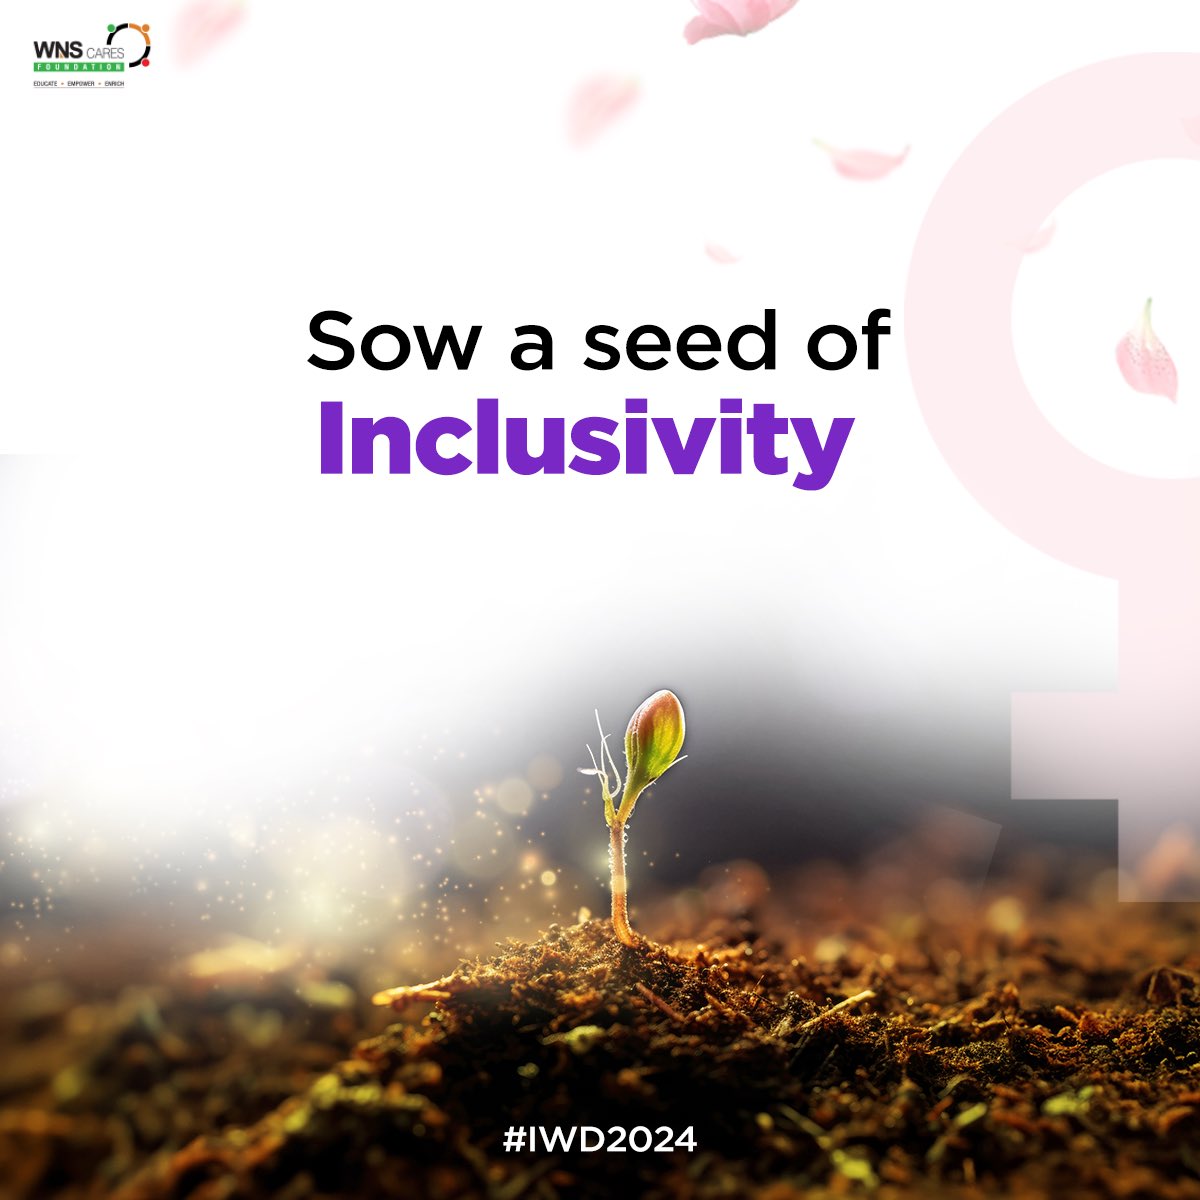 With every little gesture of inclusion for women, we forge a better world. #CountHerIn #InspireInclusion #InvestInWomen #IWD2024